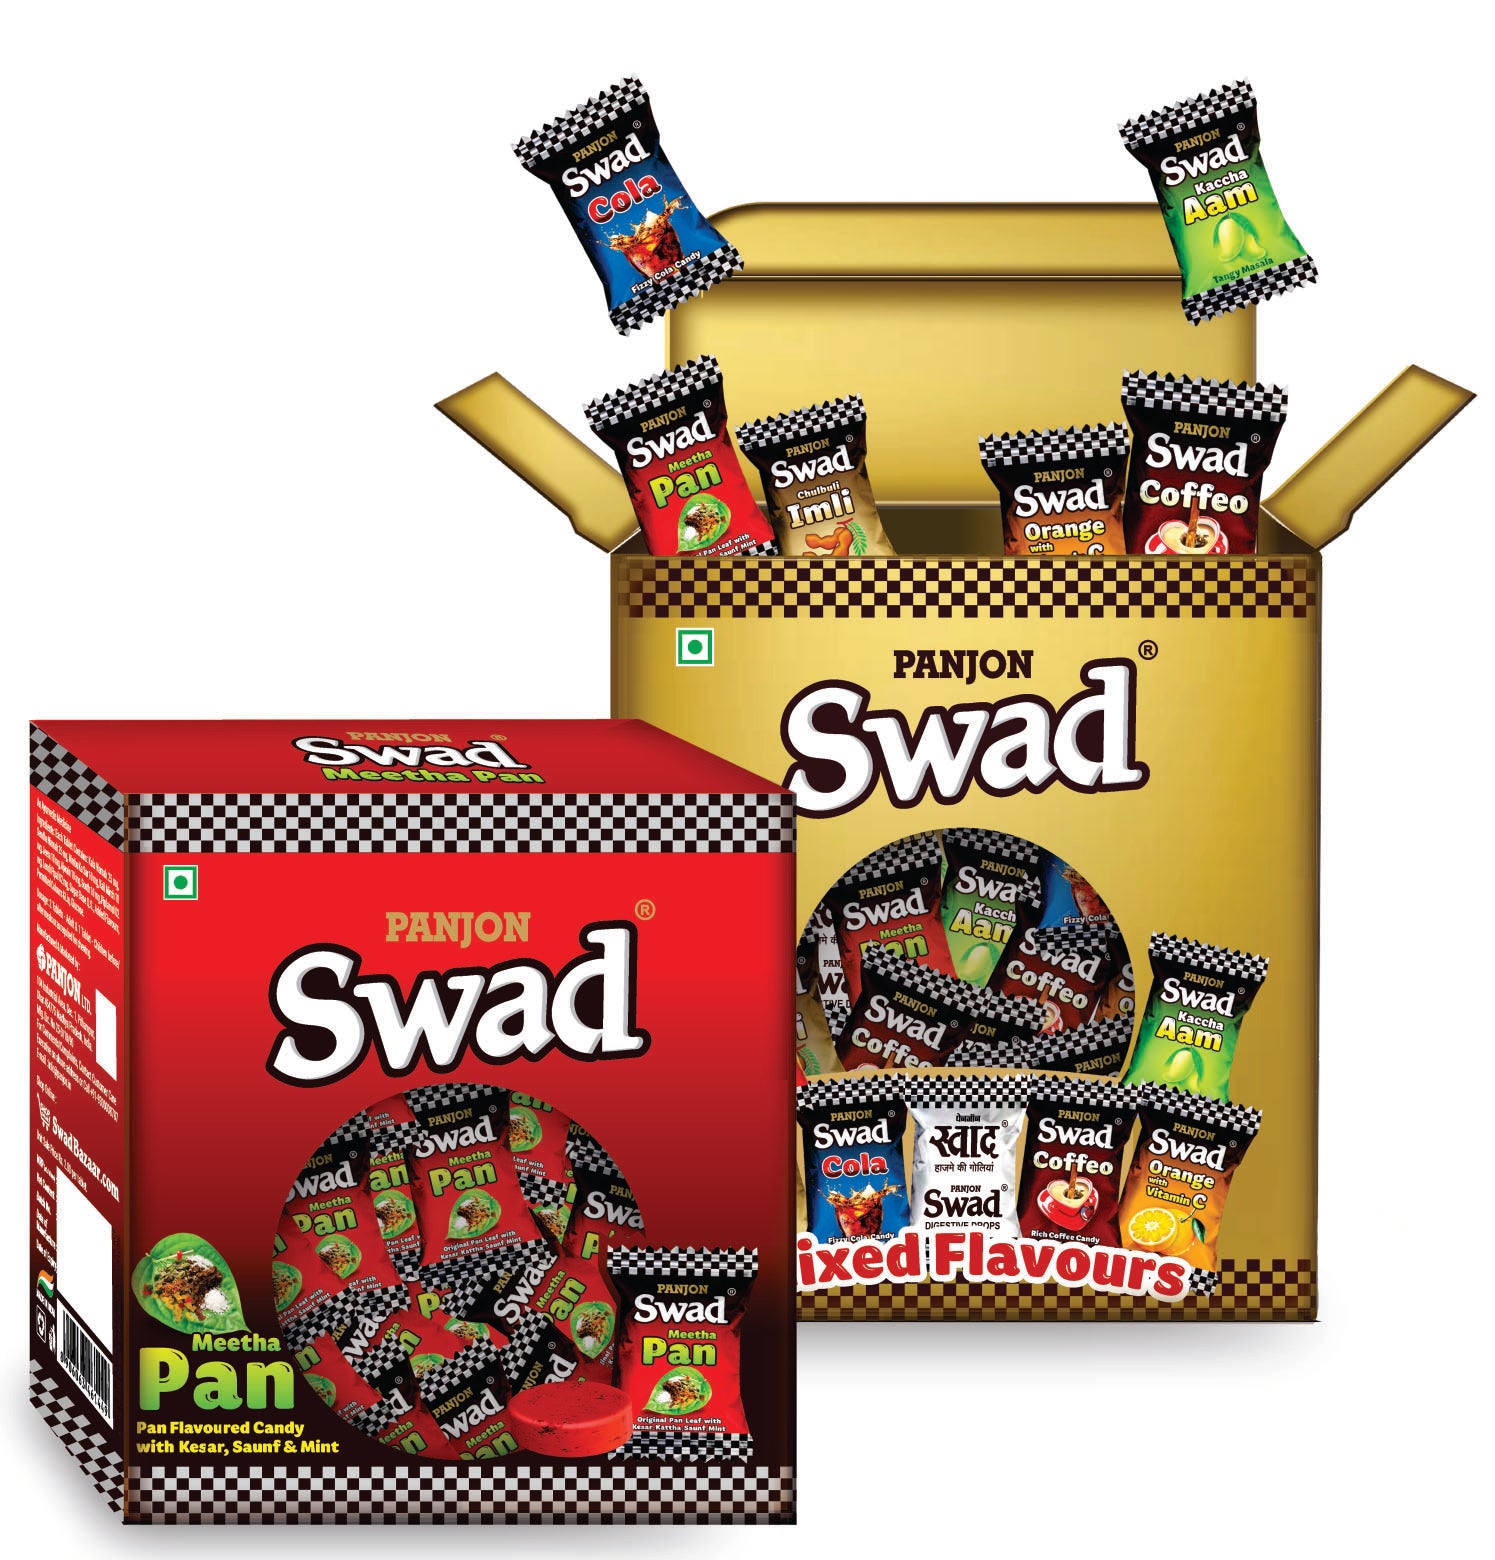 Swad Candy Gift Box (Meetha Pan & Mixed Flavour) Gifts for Husband, Wife, 125 Toffee x 2 Box Pack